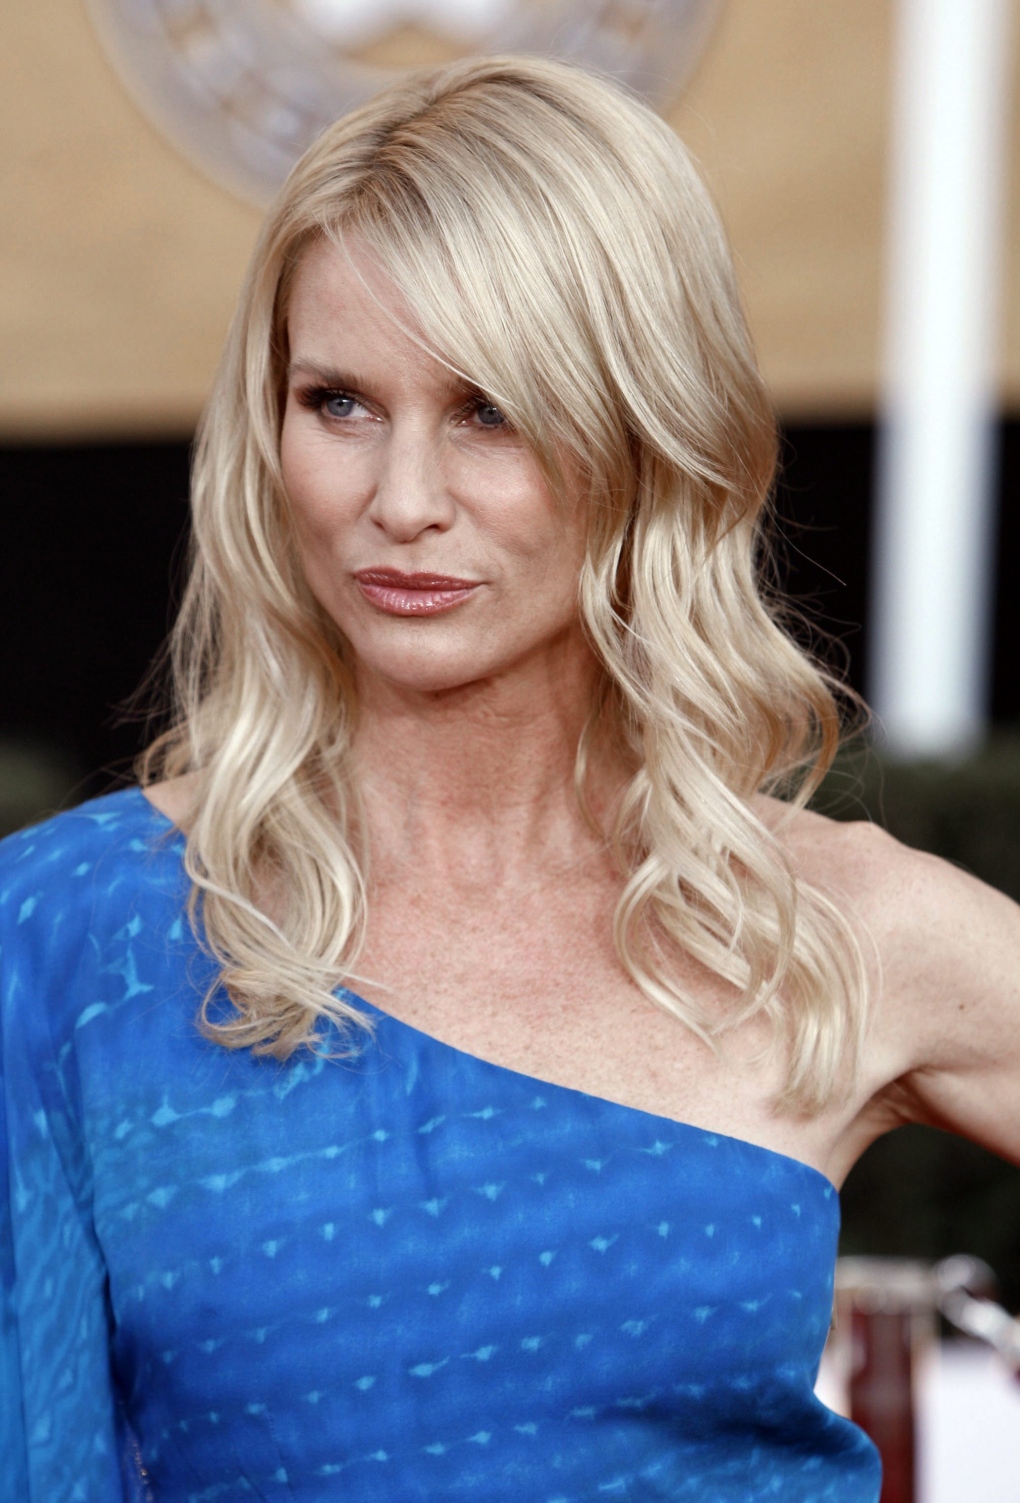 Nicollette Sheridan granted new trial in Desperate Housewives case CTV News